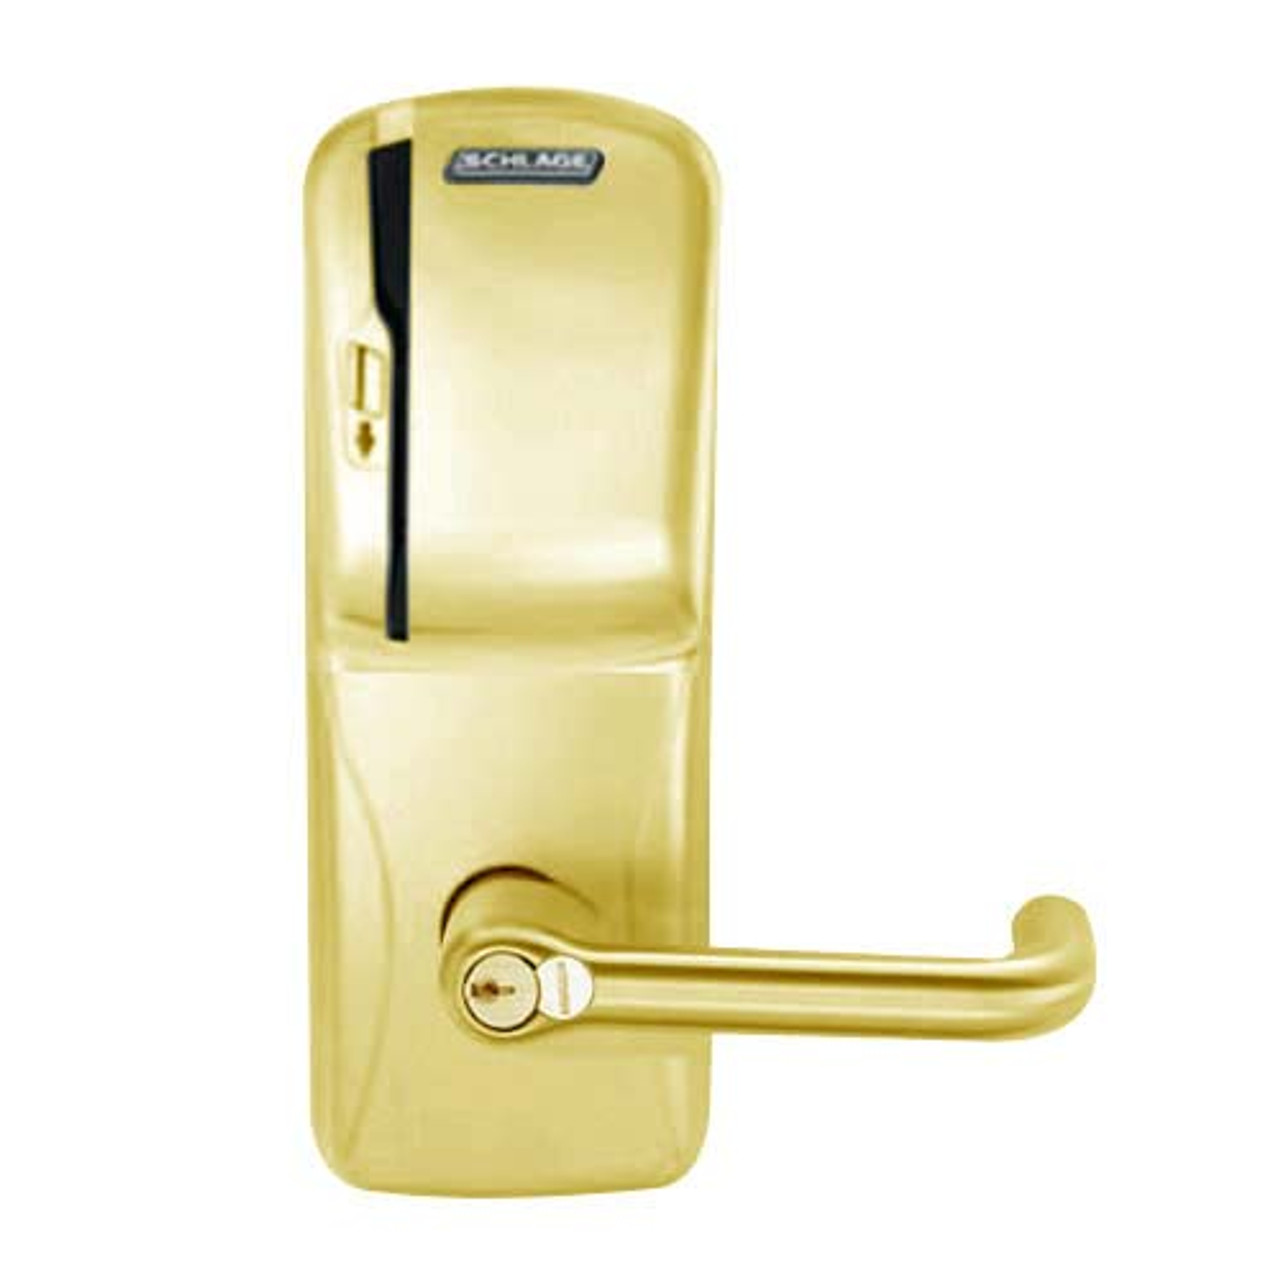 CO200-MD-40-MS-TLR-RD-605 Mortise Deadbolt Standalone Electronic Magnetic Stripe Locks in Bright Brass